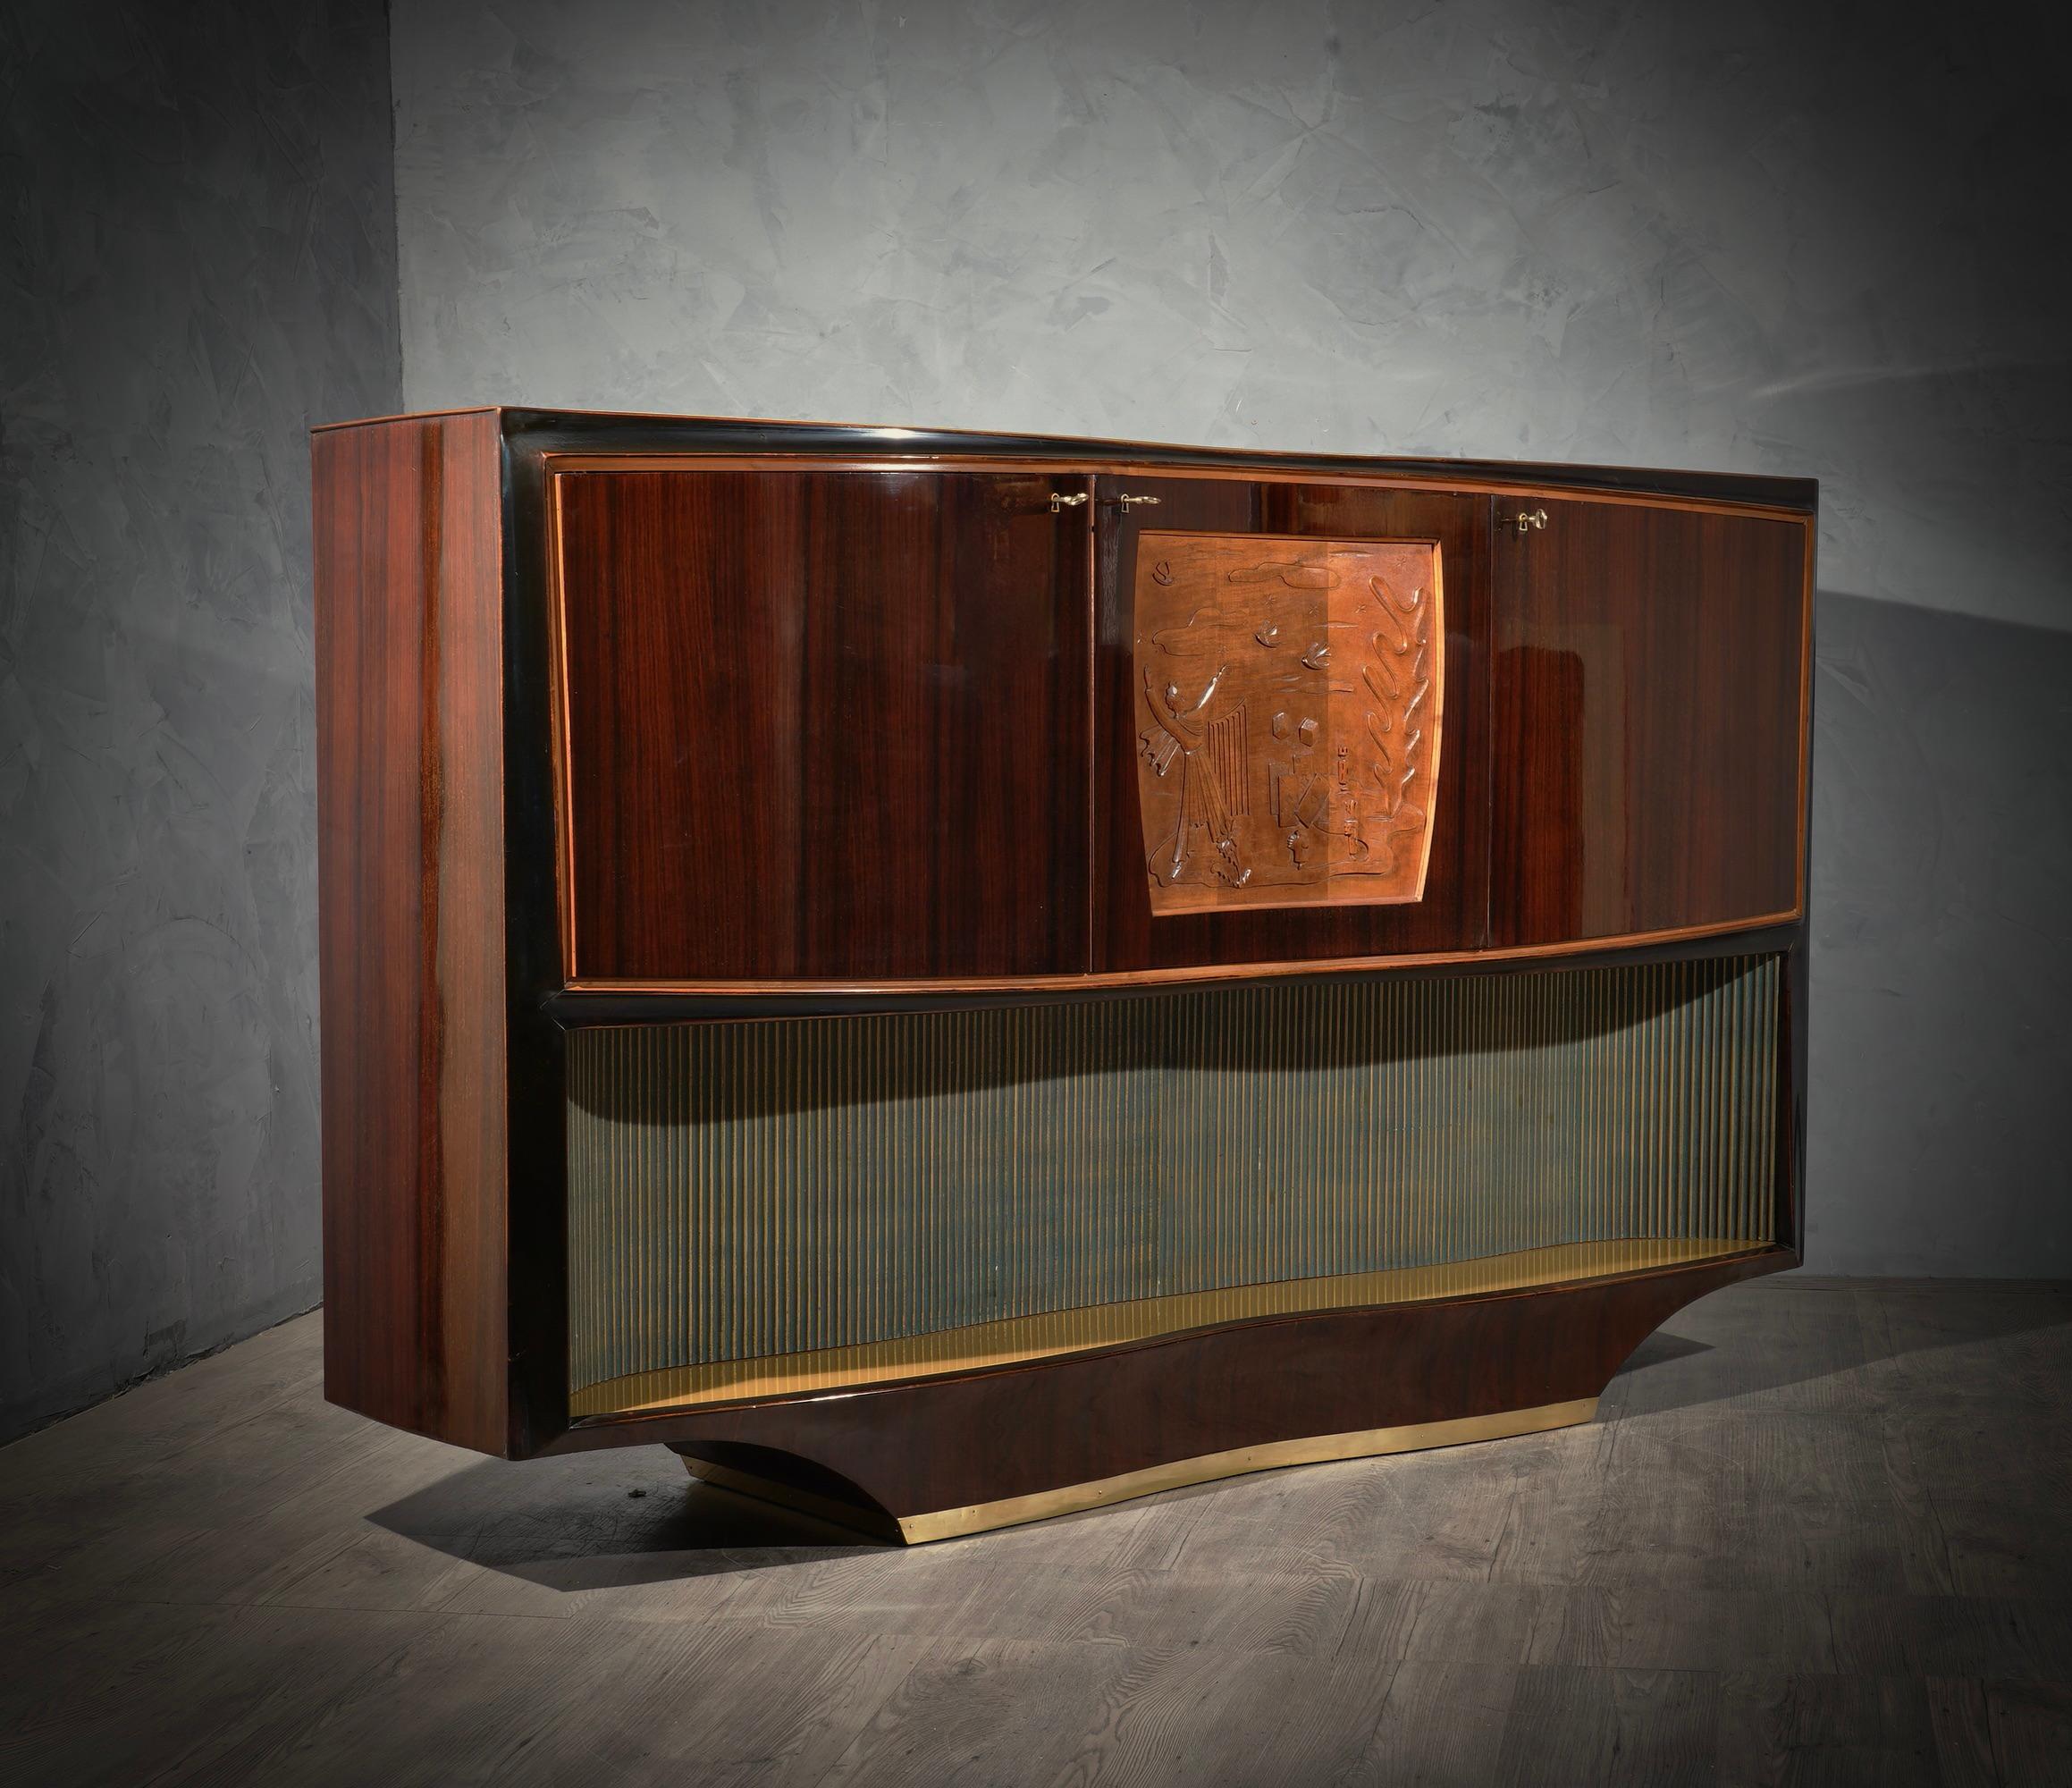 Bar cabinet buffet by Vittorio Dassi, composed of precious materials, such as walnut wood, brass and glass.

All veneered in walnut wood. Top in gold colored glass, recessed. Three front doors, which follow the movement of the top. The two sides are